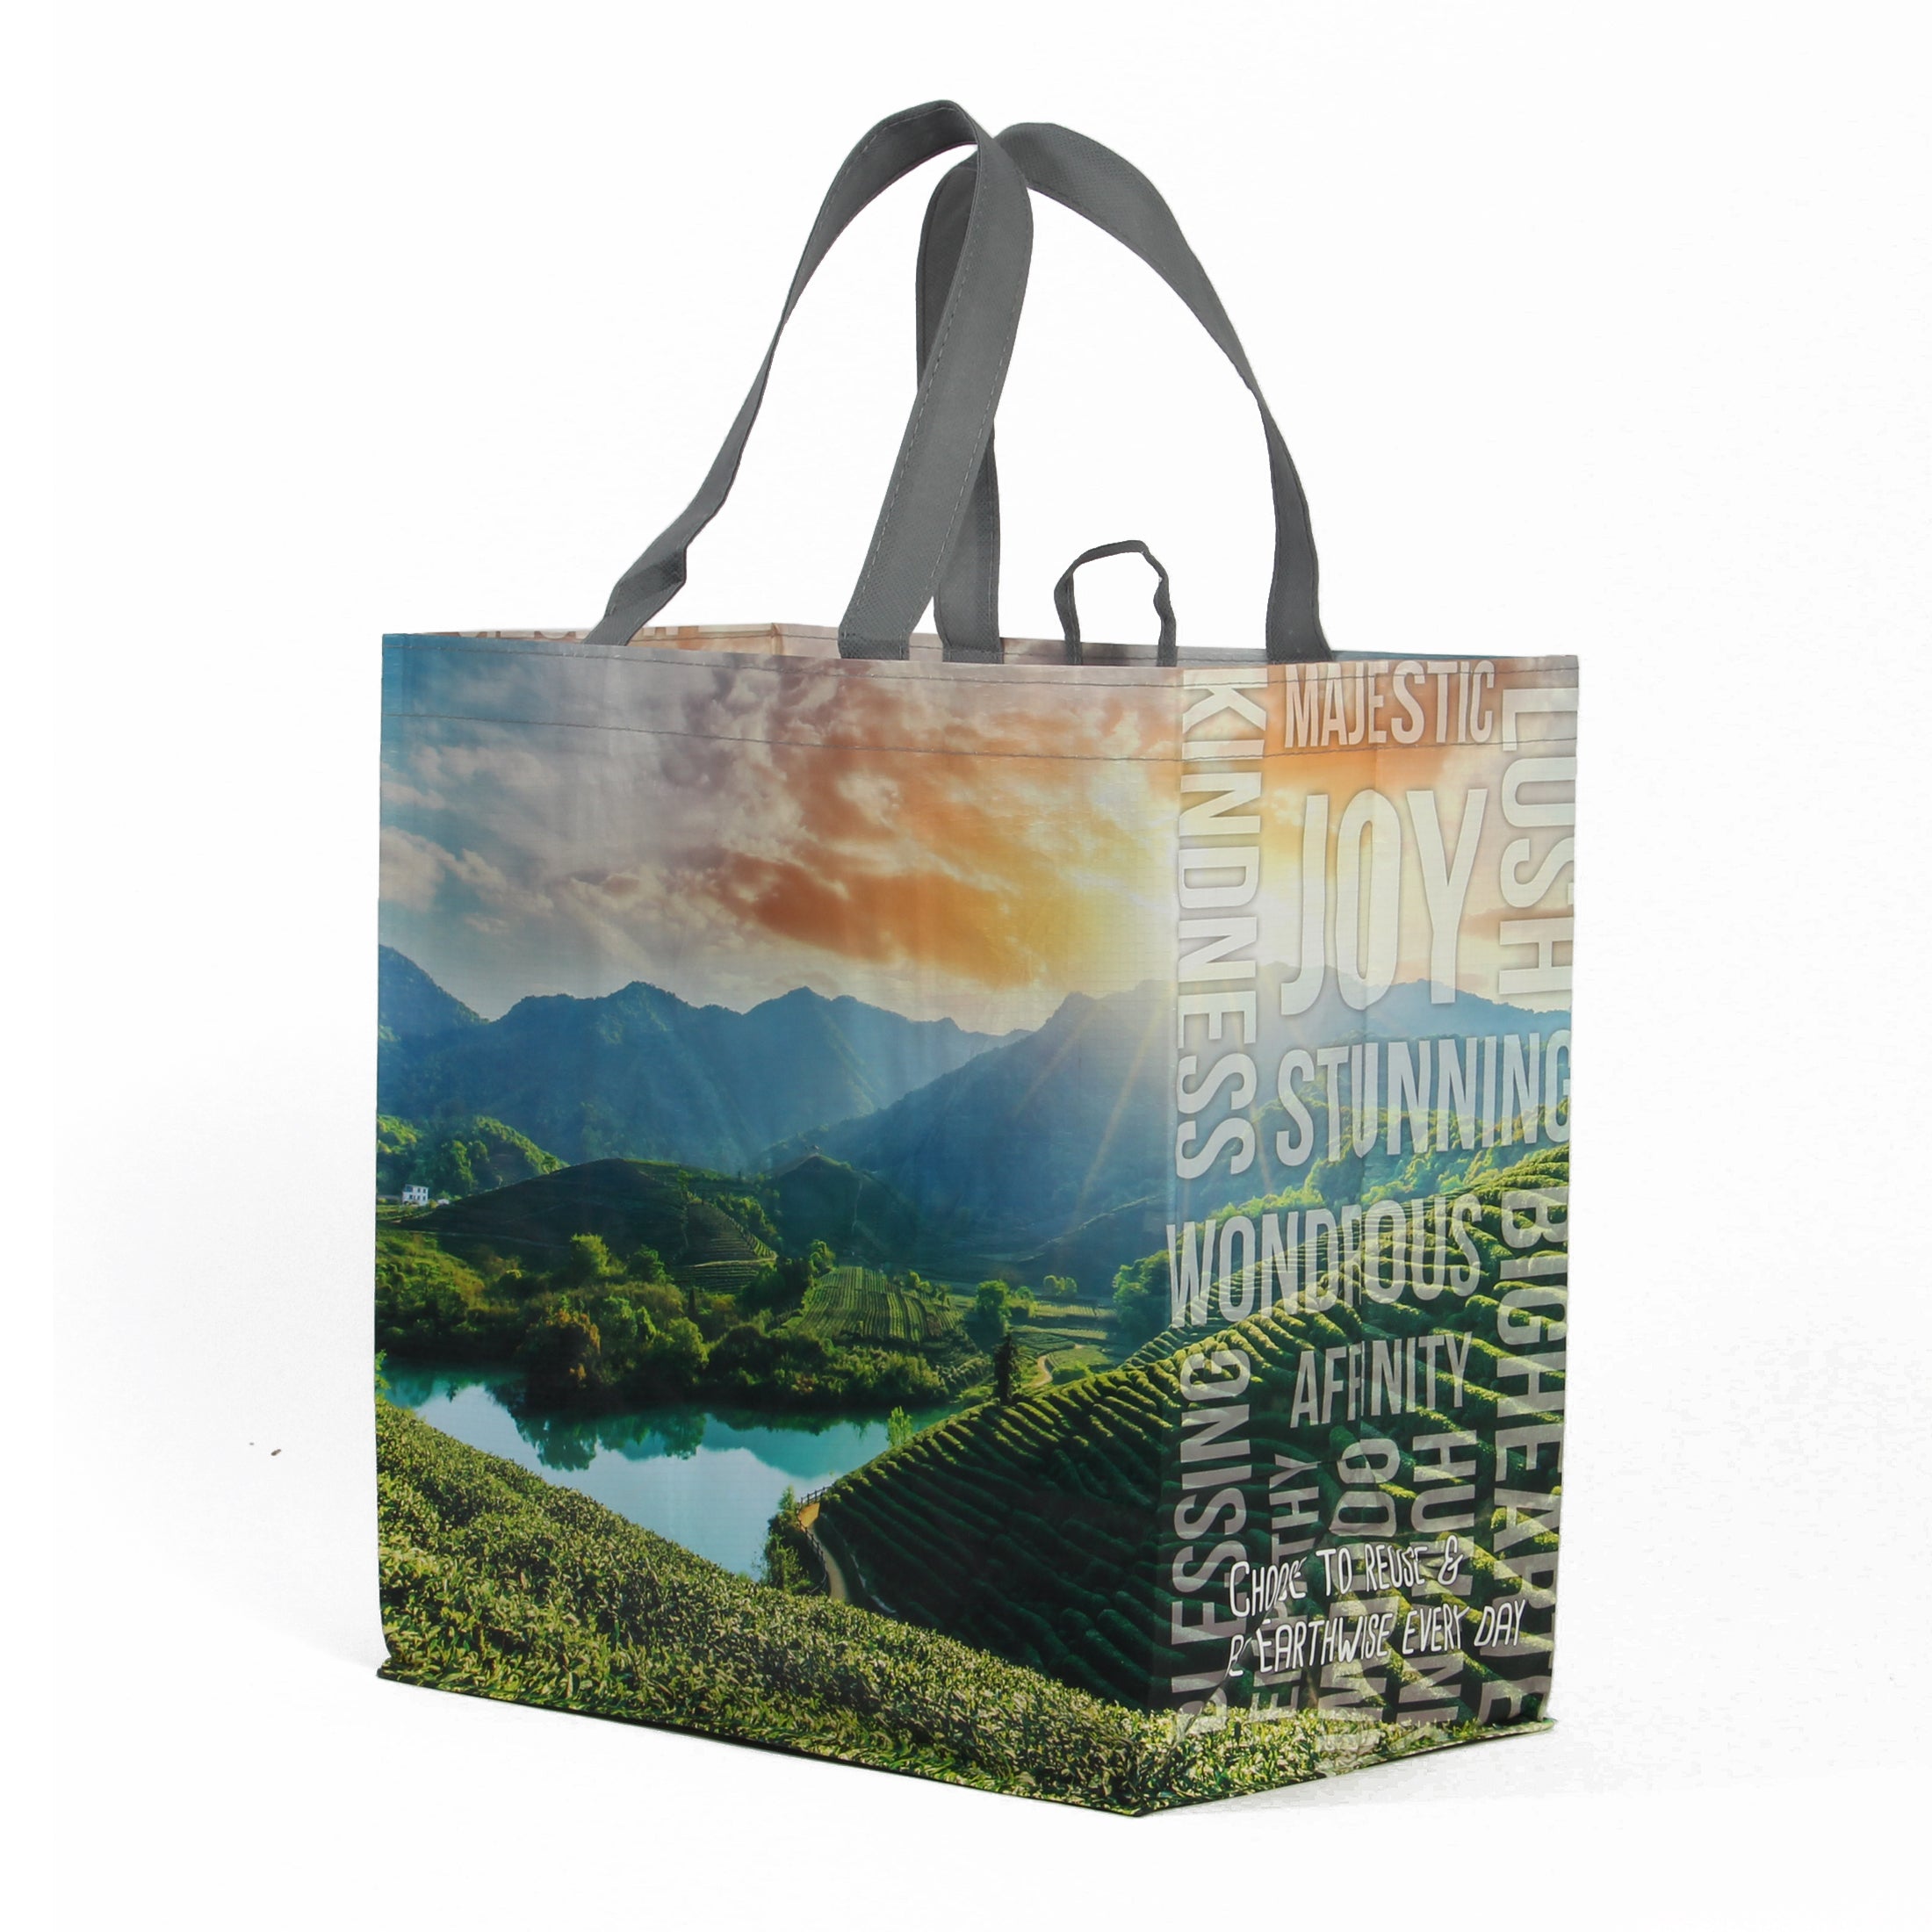 View our range of eco-friendly insulated shopping bags and totes.